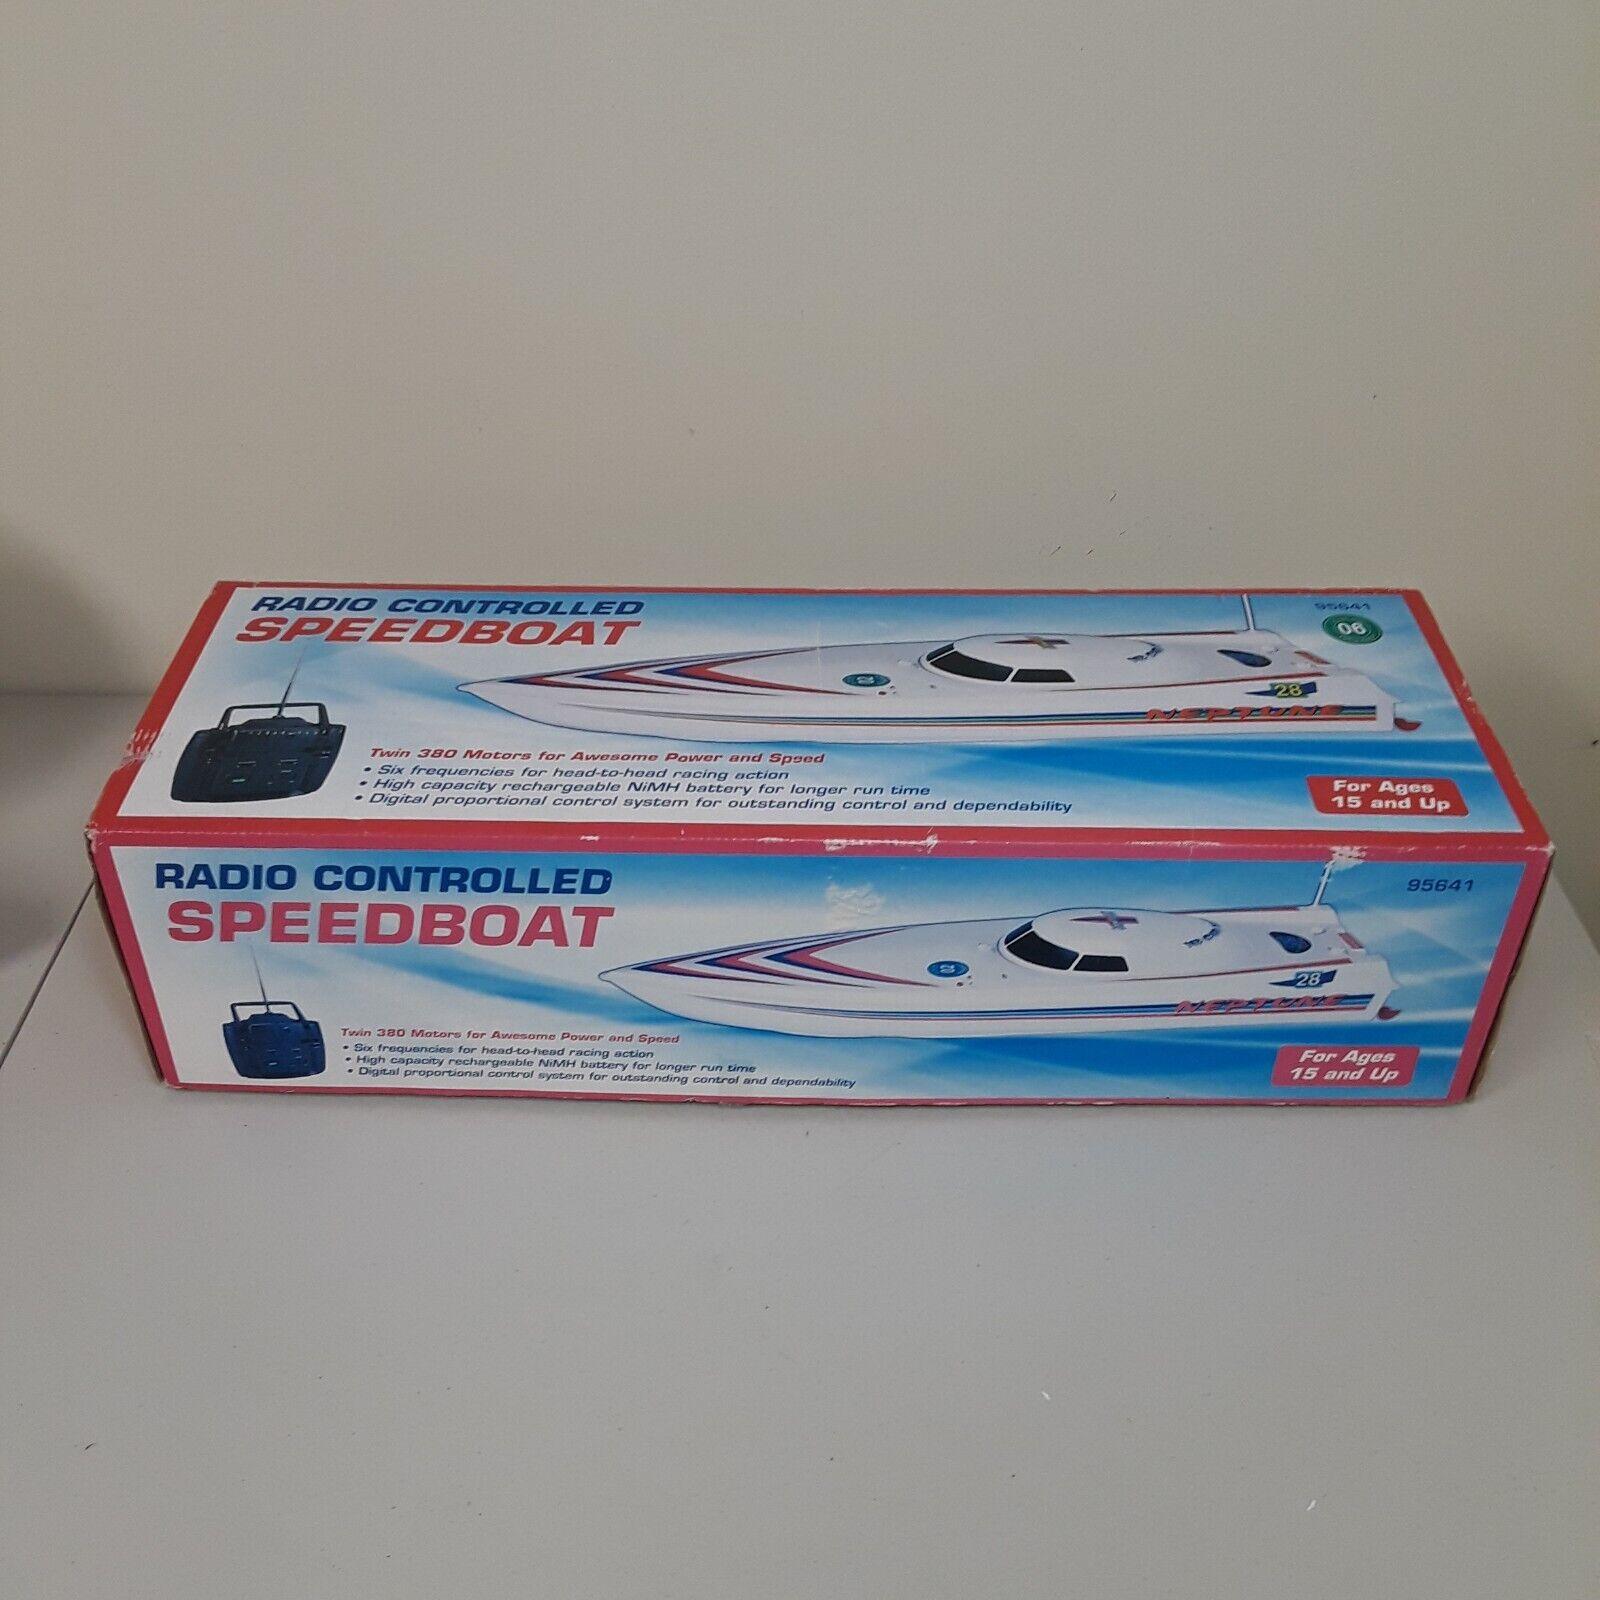 Harbor Freight Neptune Rc Boat: Key Features of the Harbor Freight Neptune RC Boat